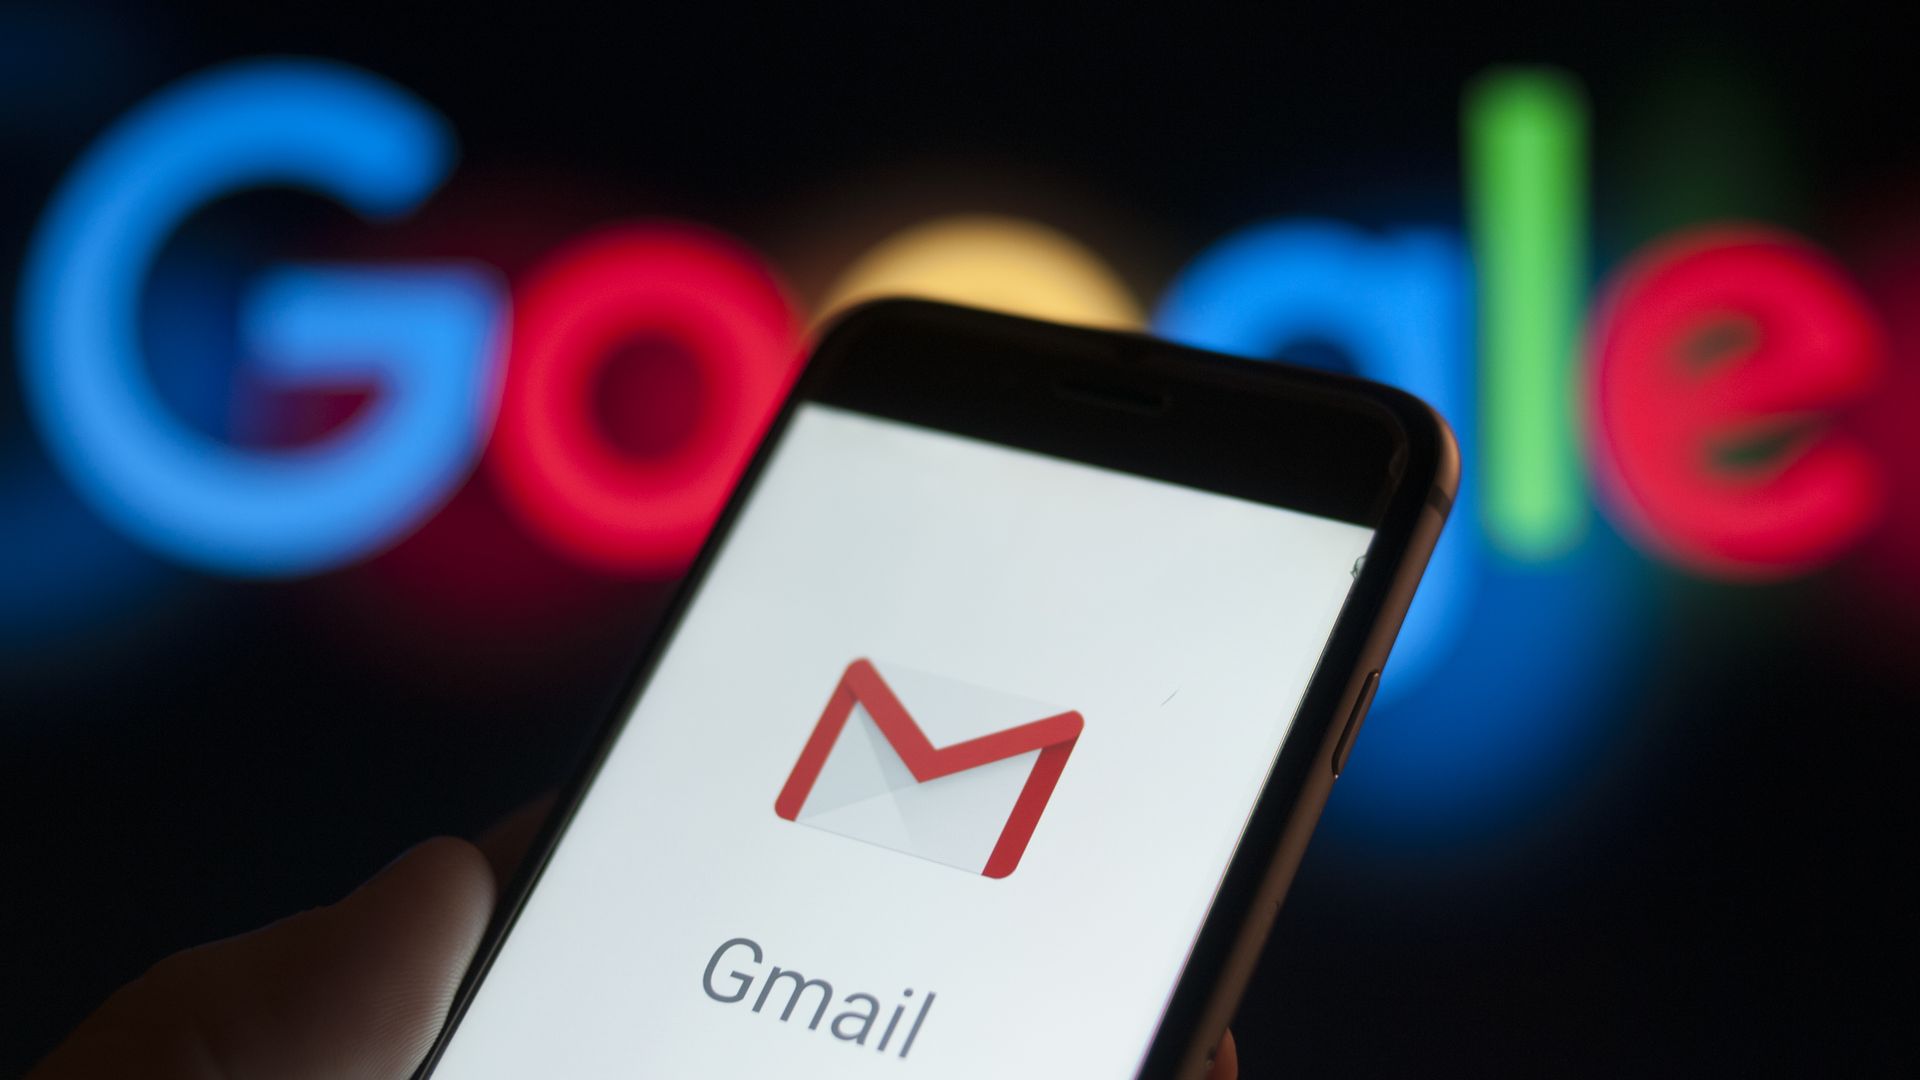 A phone screen with the Gmail app logo on it before the Google logo on a wall.